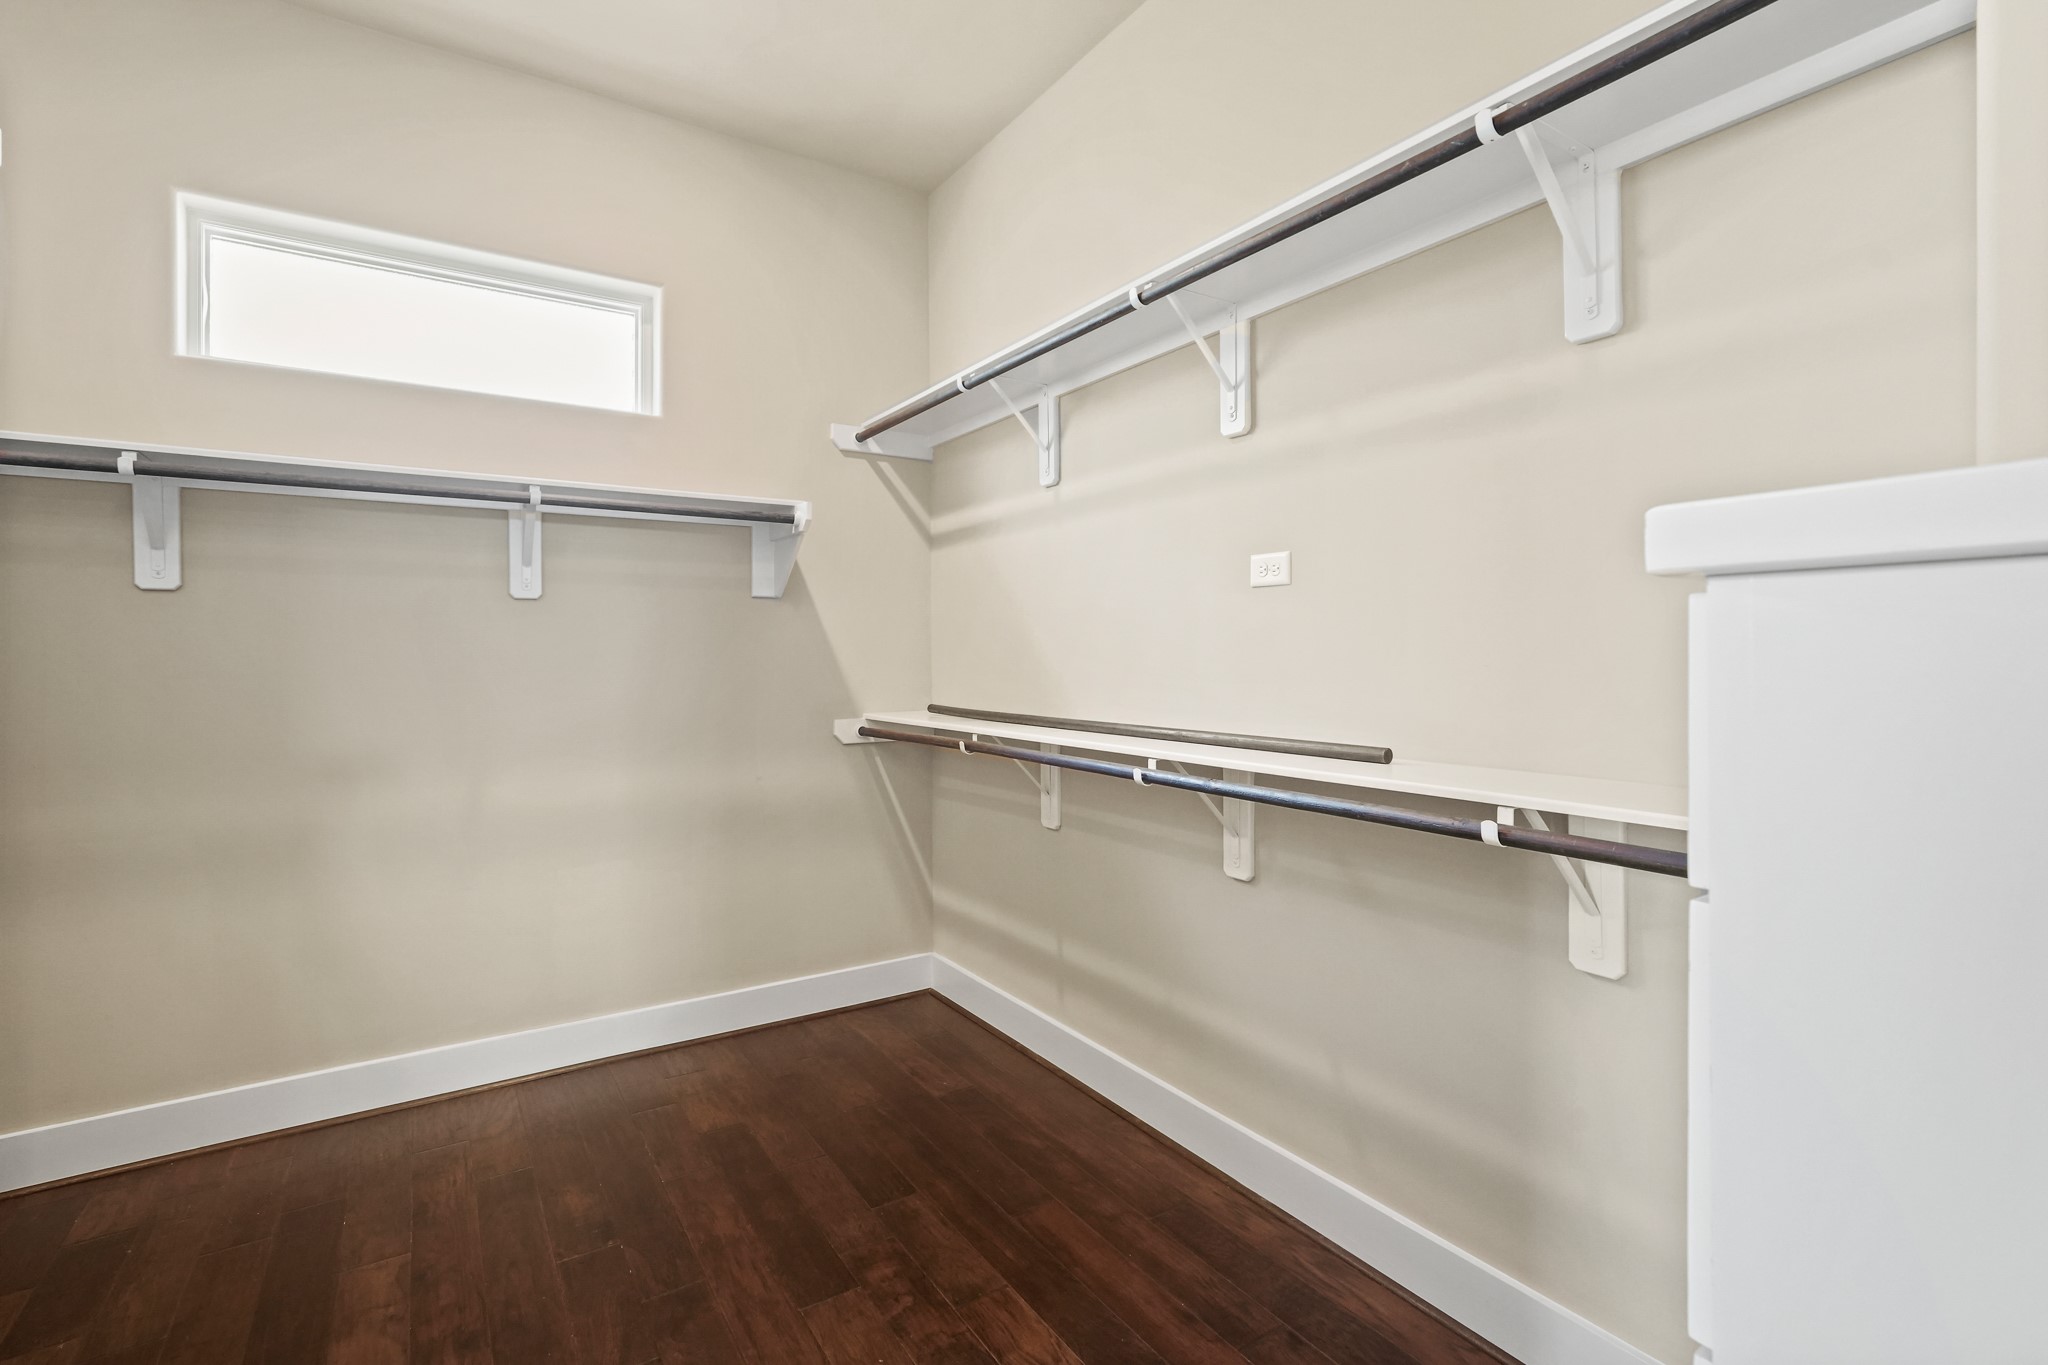 Enormous walk-in closet adjacent to ensuite master bathroom features an abundance of space for your personal effects.